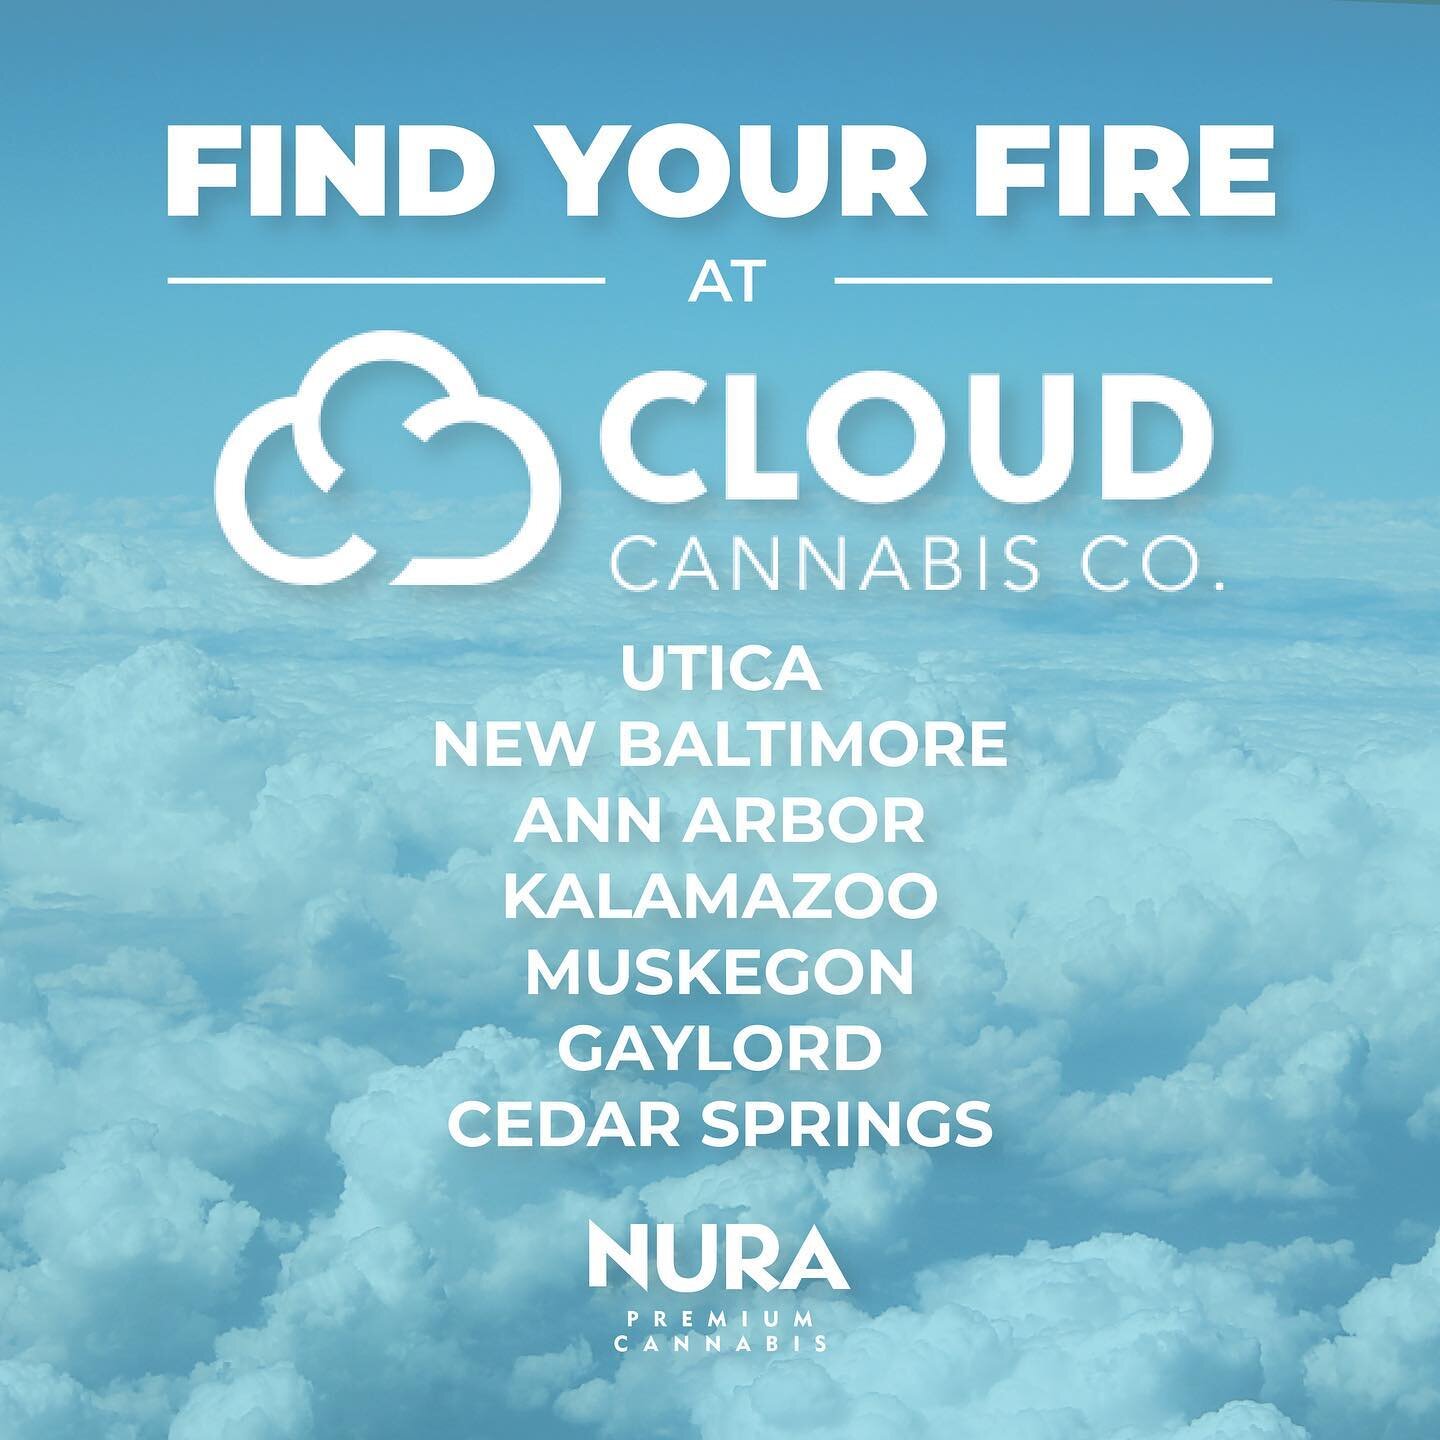 Fresh Nura Drops at 7 of @cloudcannabisco locations! ☁️ #FindYourFire

NOTHING FOR SALE. EDUCATIONAL PURPOSES ONLY.